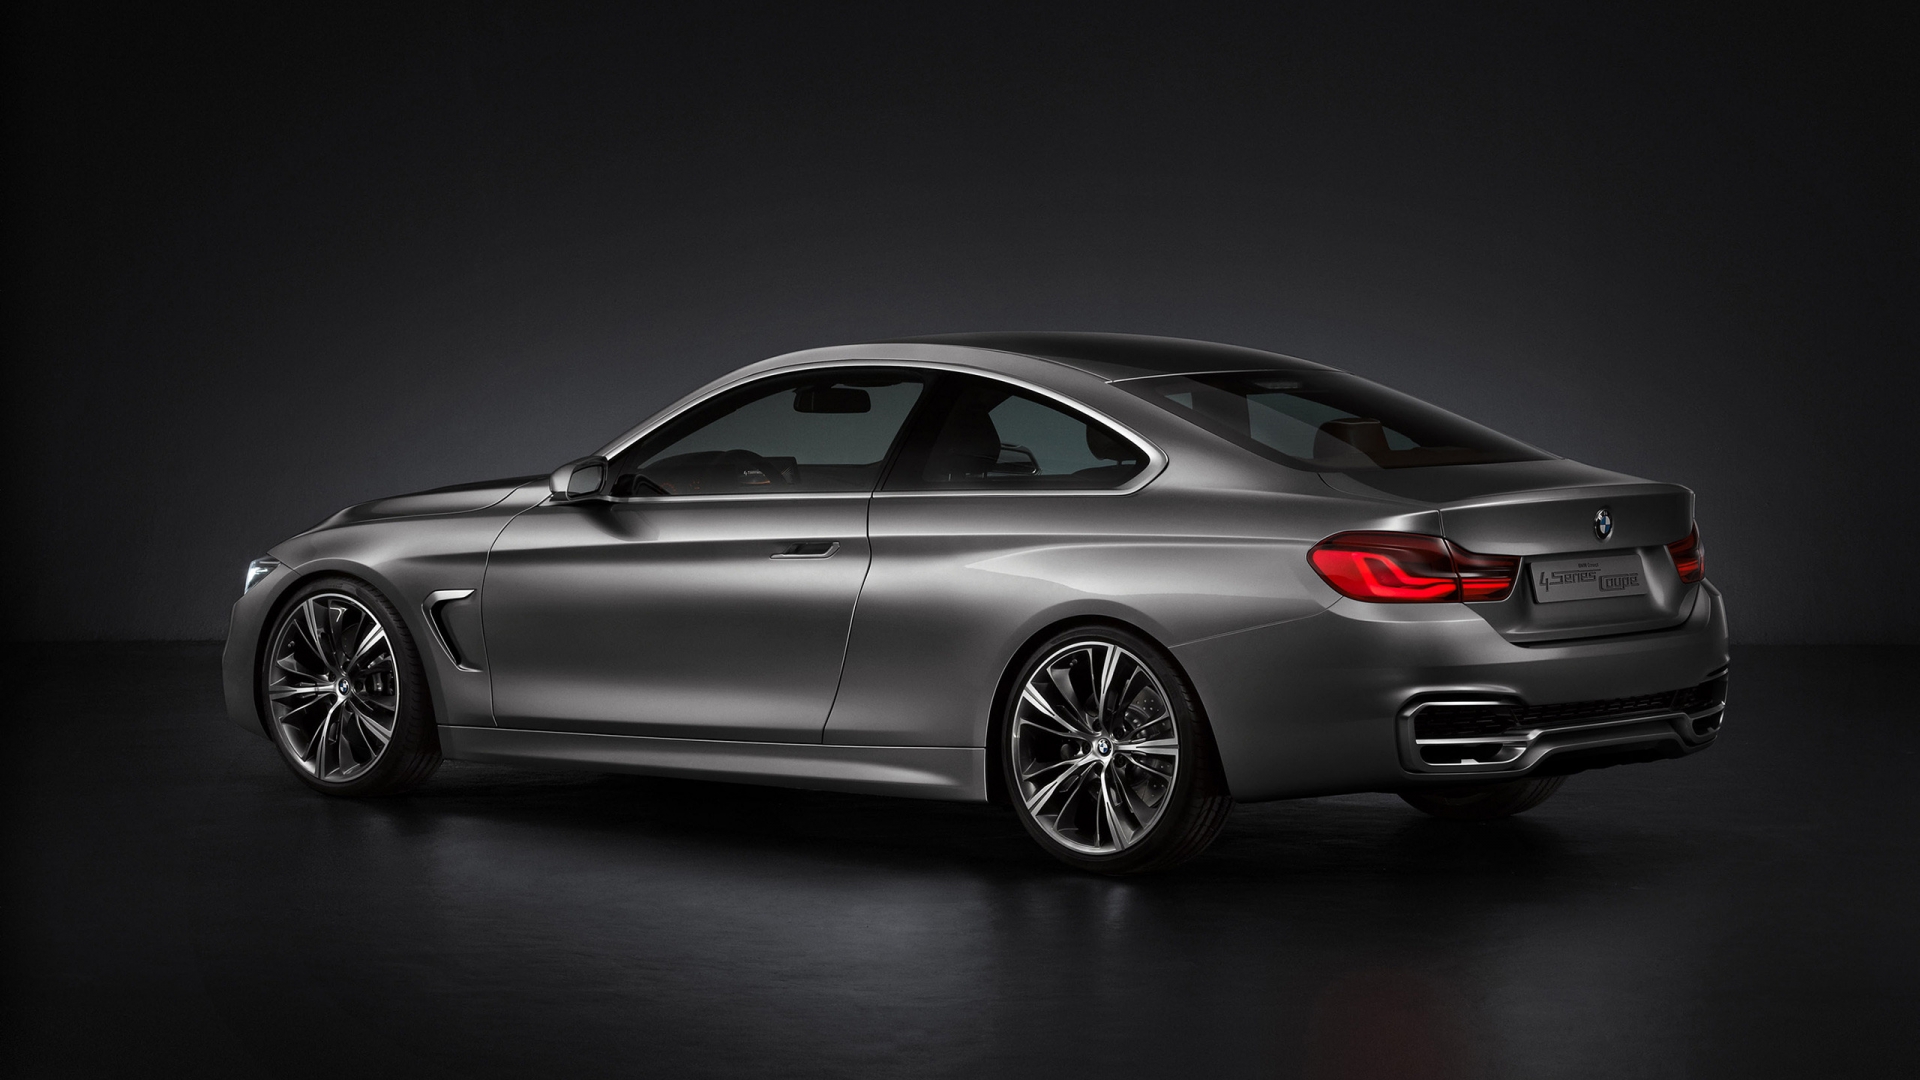 BMW 4 Series Coupe Concept Rear Studio for 1920 x 1080 HDTV 1080p resolution